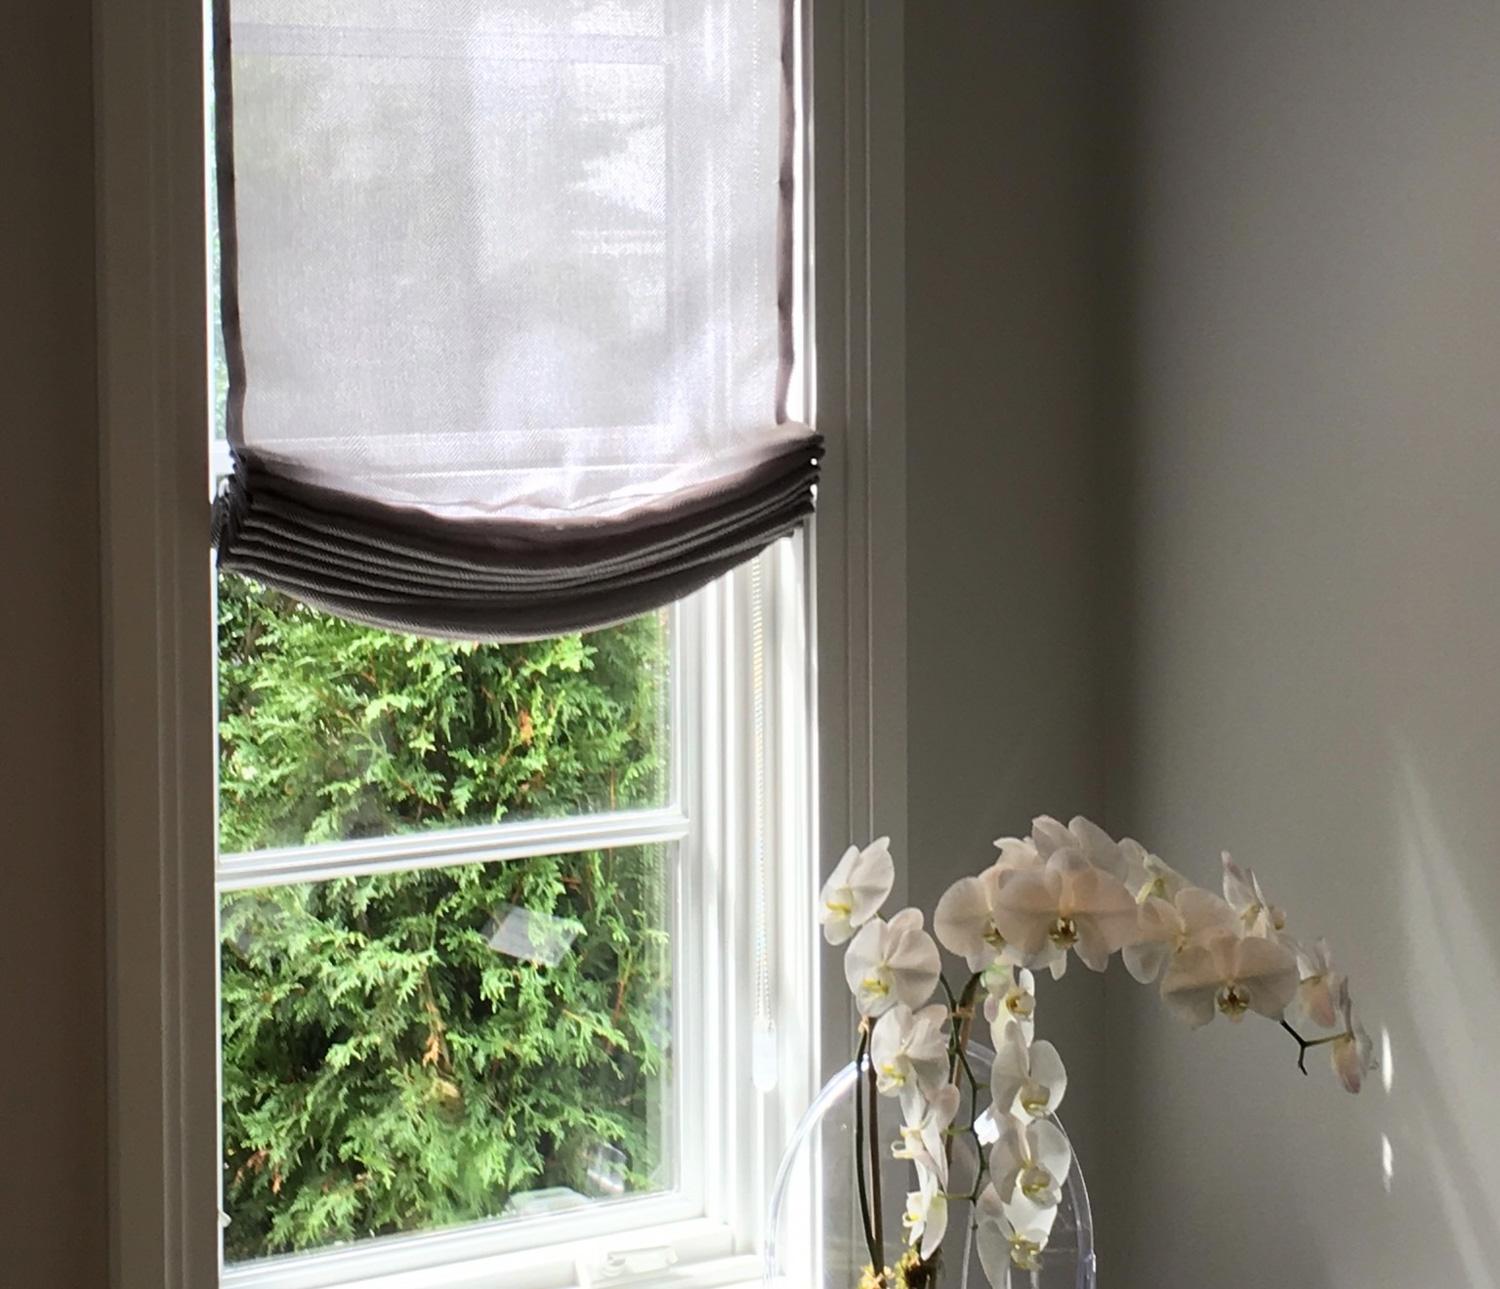 White vase on windowsill with Fabric Roman Shades in background.